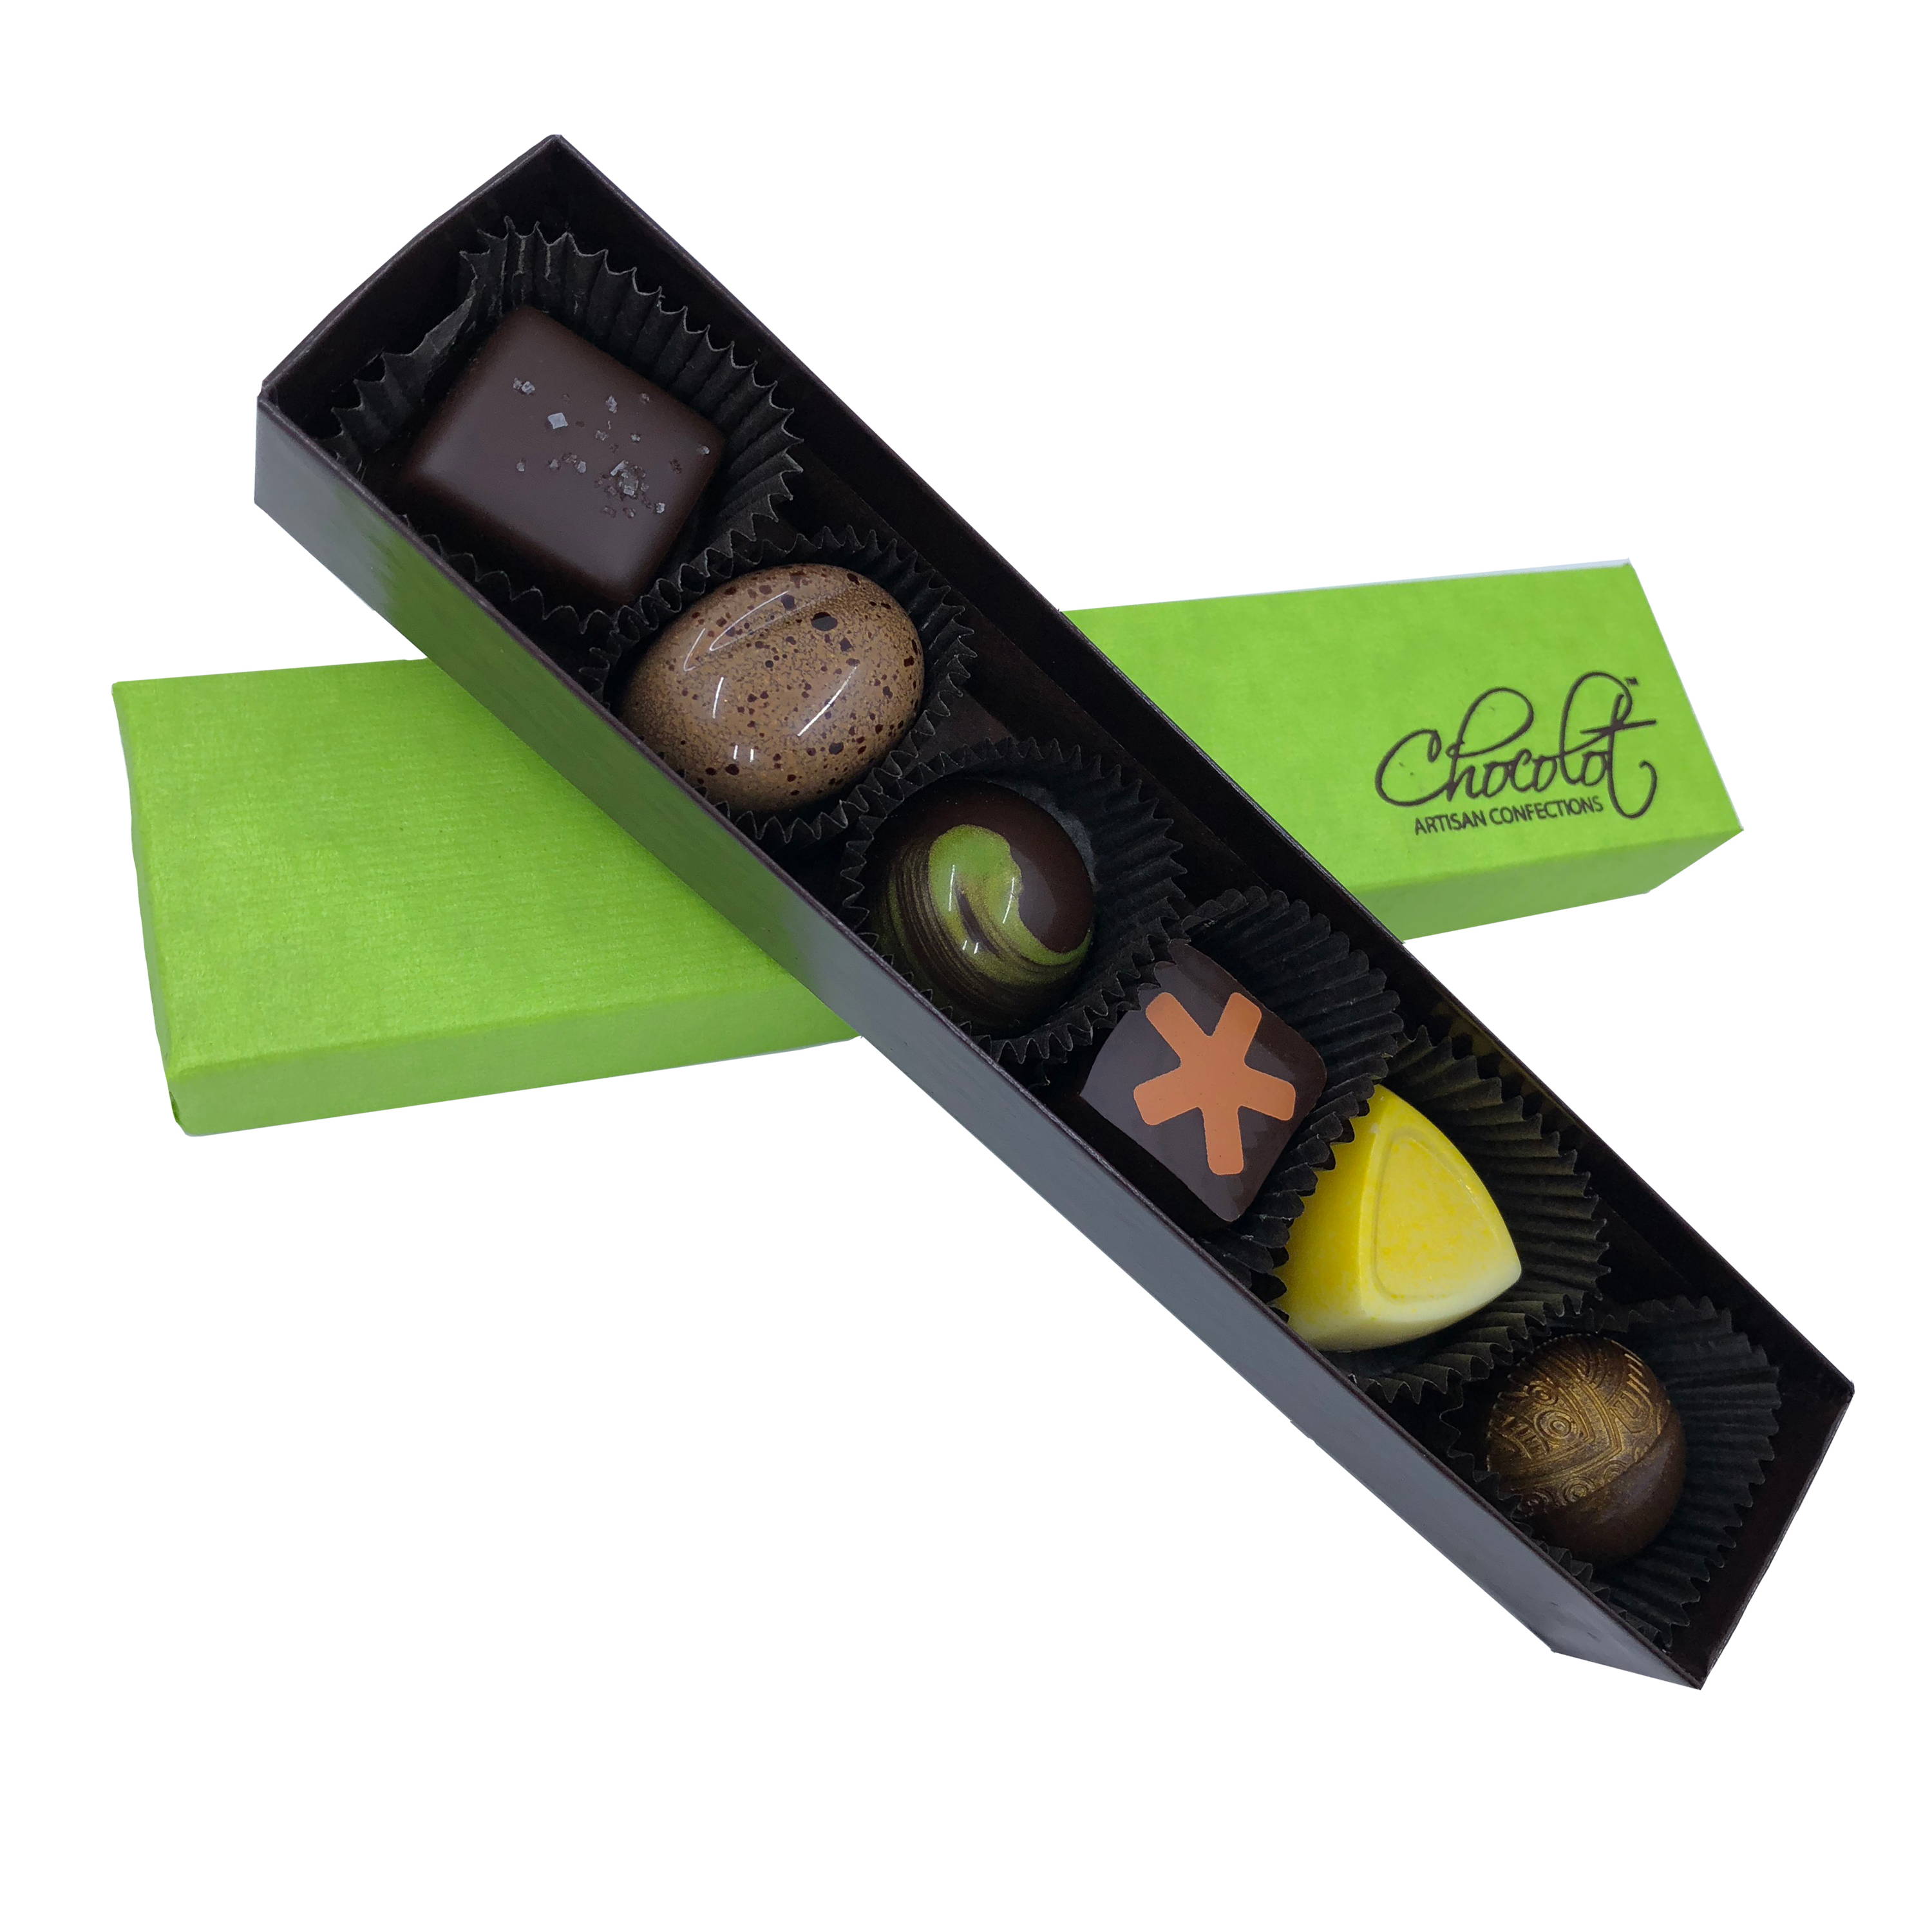 Corporate – Chocolot Artisan Confections